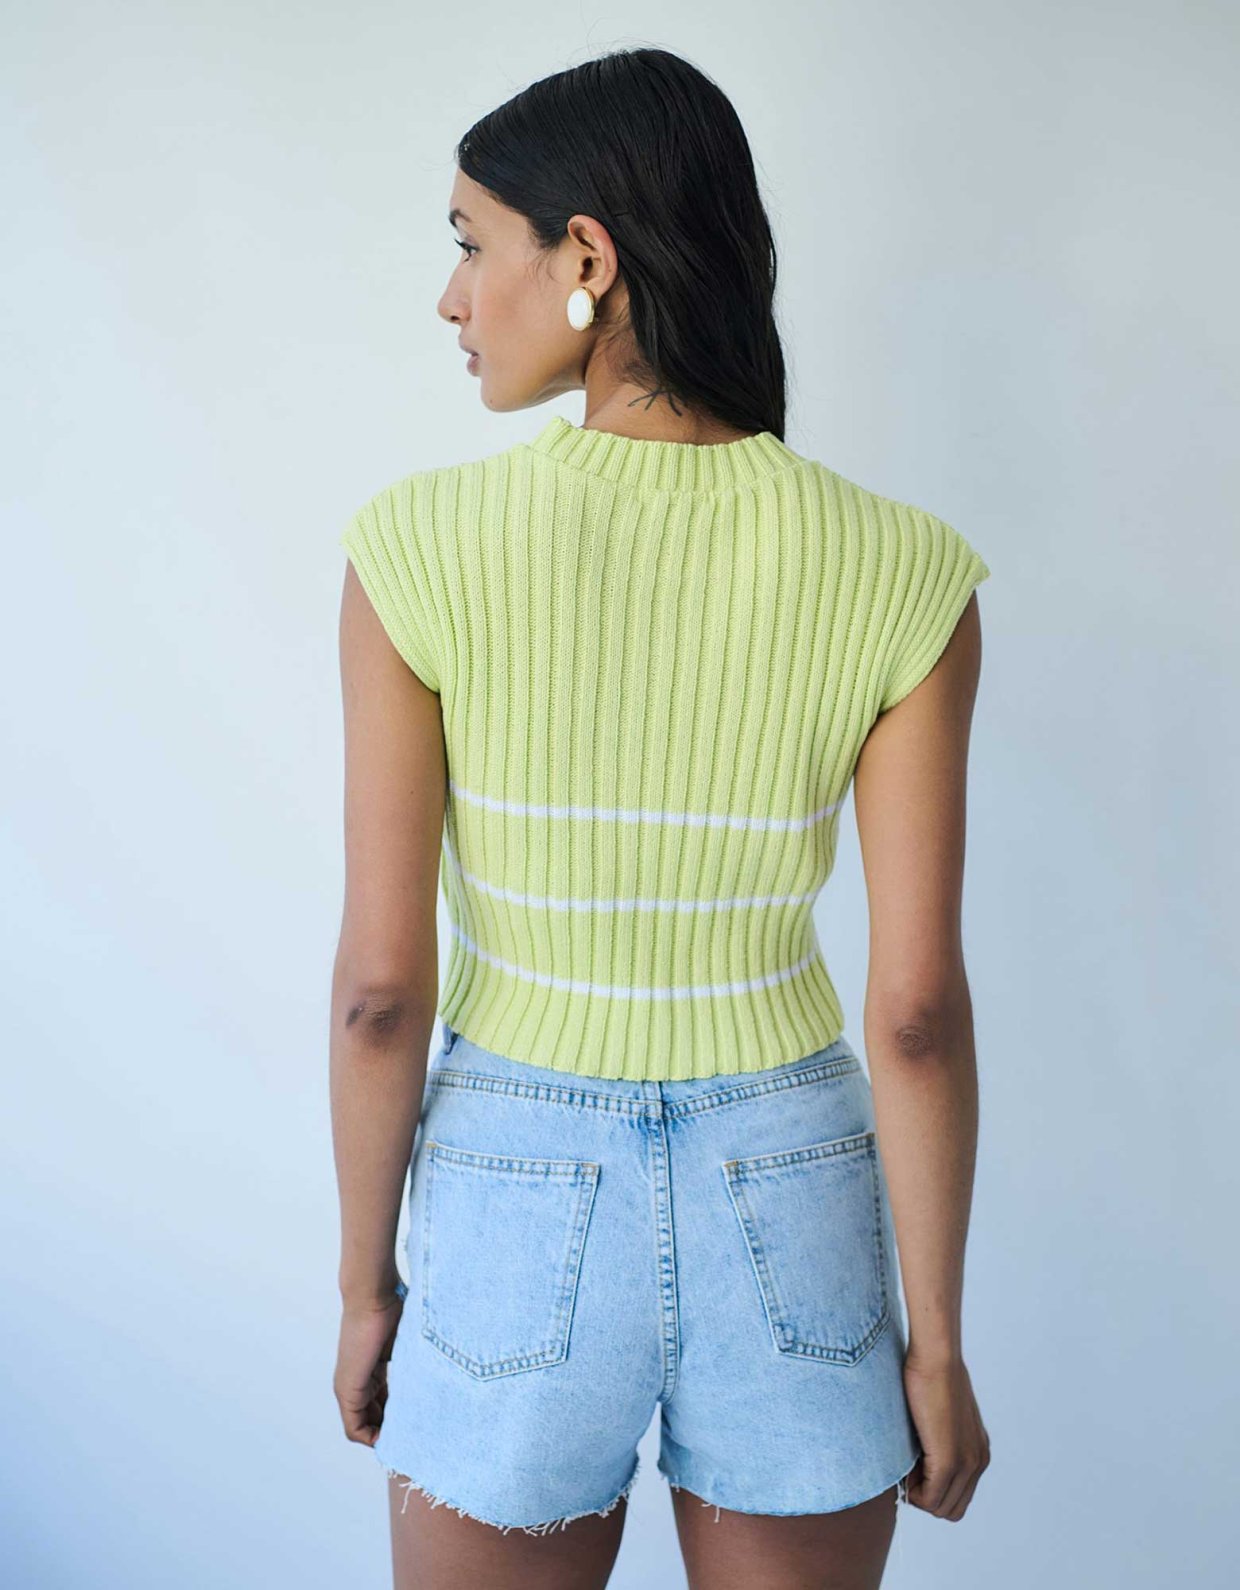 Combos Knitwear Stripped sleeveless top yellow white